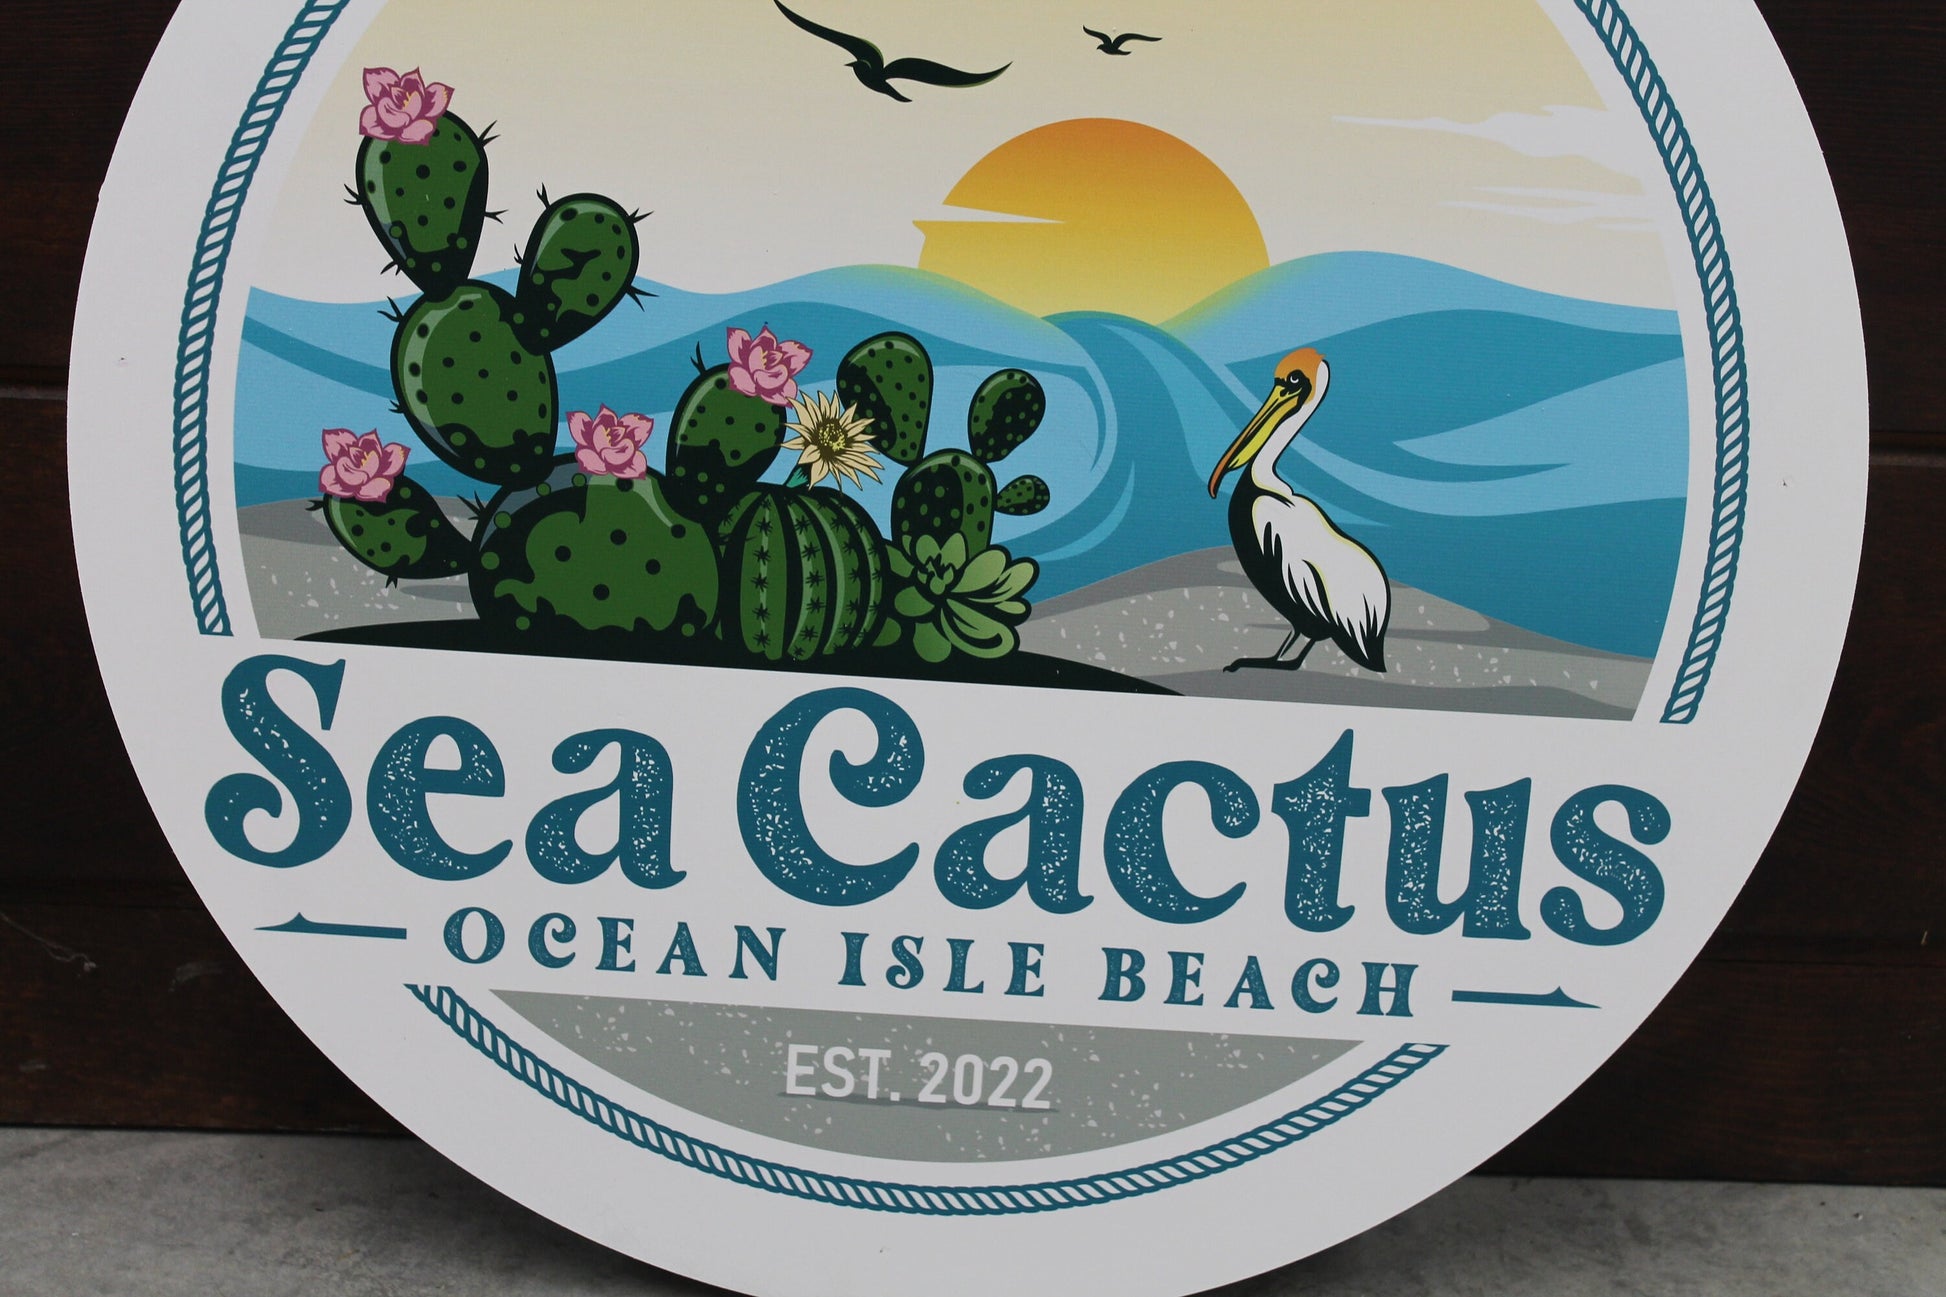 Personalized Waterproof Sign Colorful PVC Plastic Fade Resistant Round Circle Logo Custom Business Ocean Cactus Signage Commerical